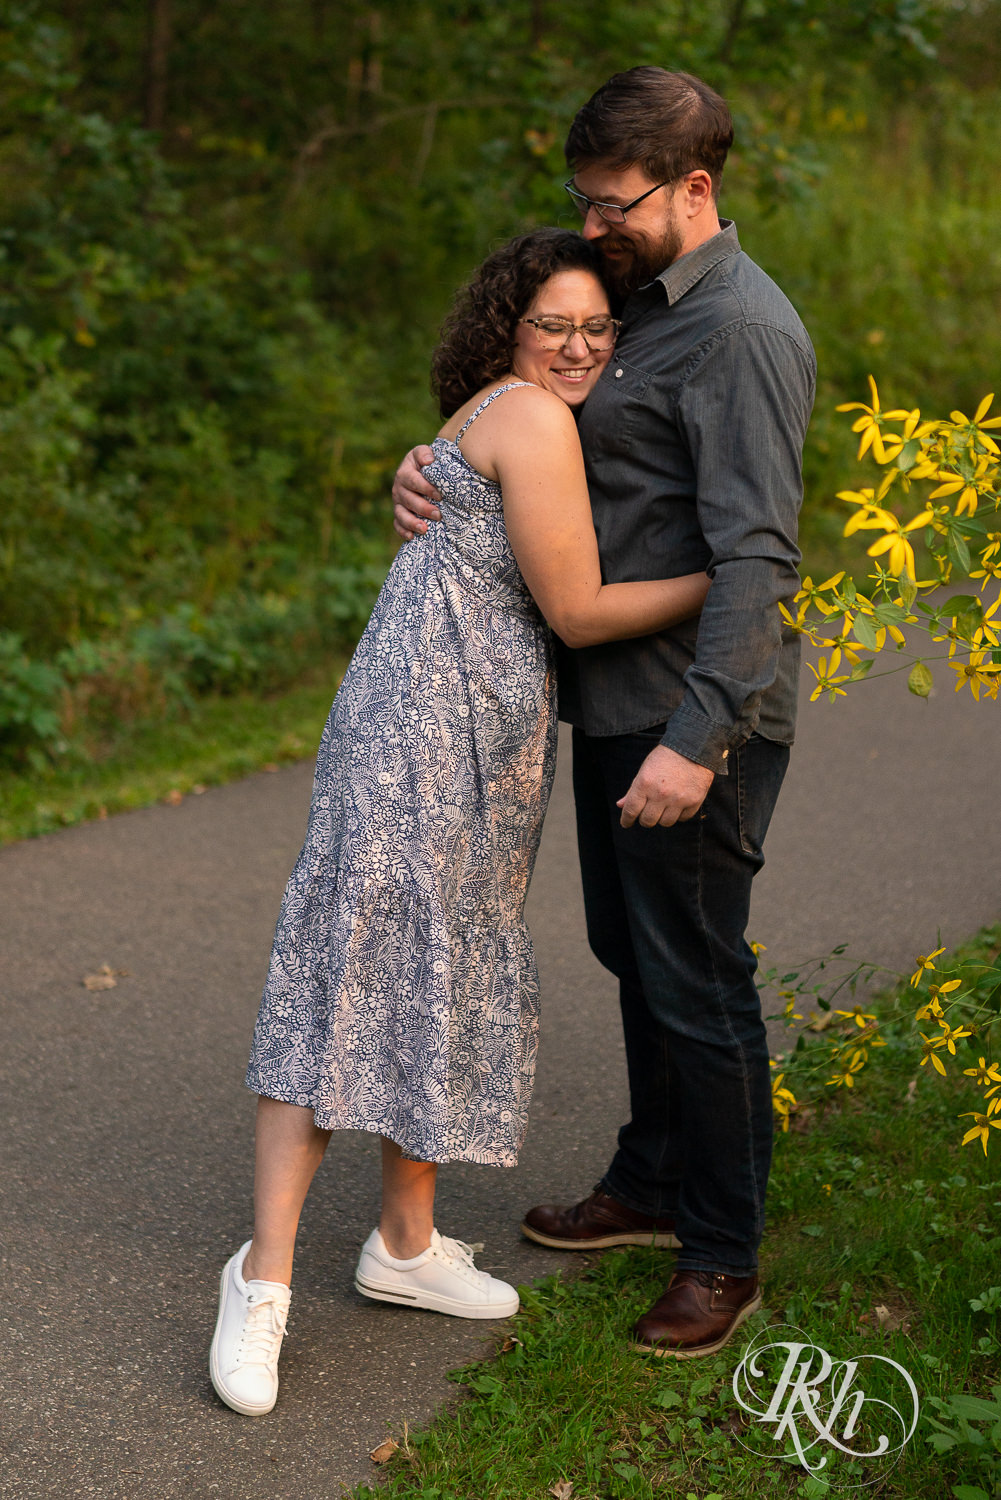 Man and woman hugging at sunset engagement session in Eagan, Minnesota.